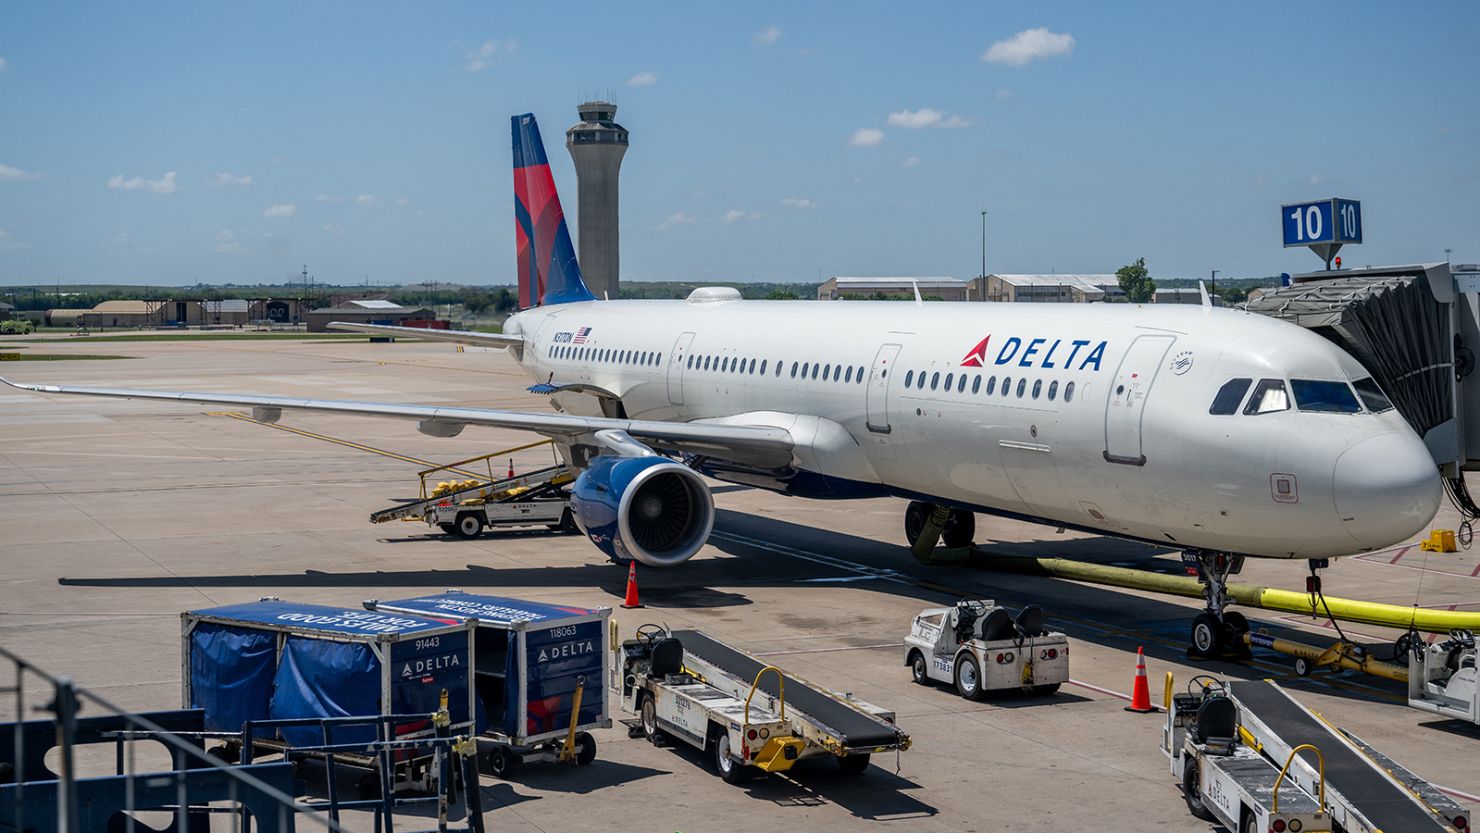 A man was arrested Sunday after boarding a Delta Air Lines plane without a ticket in Salt Lake City, Utah, court documents said.